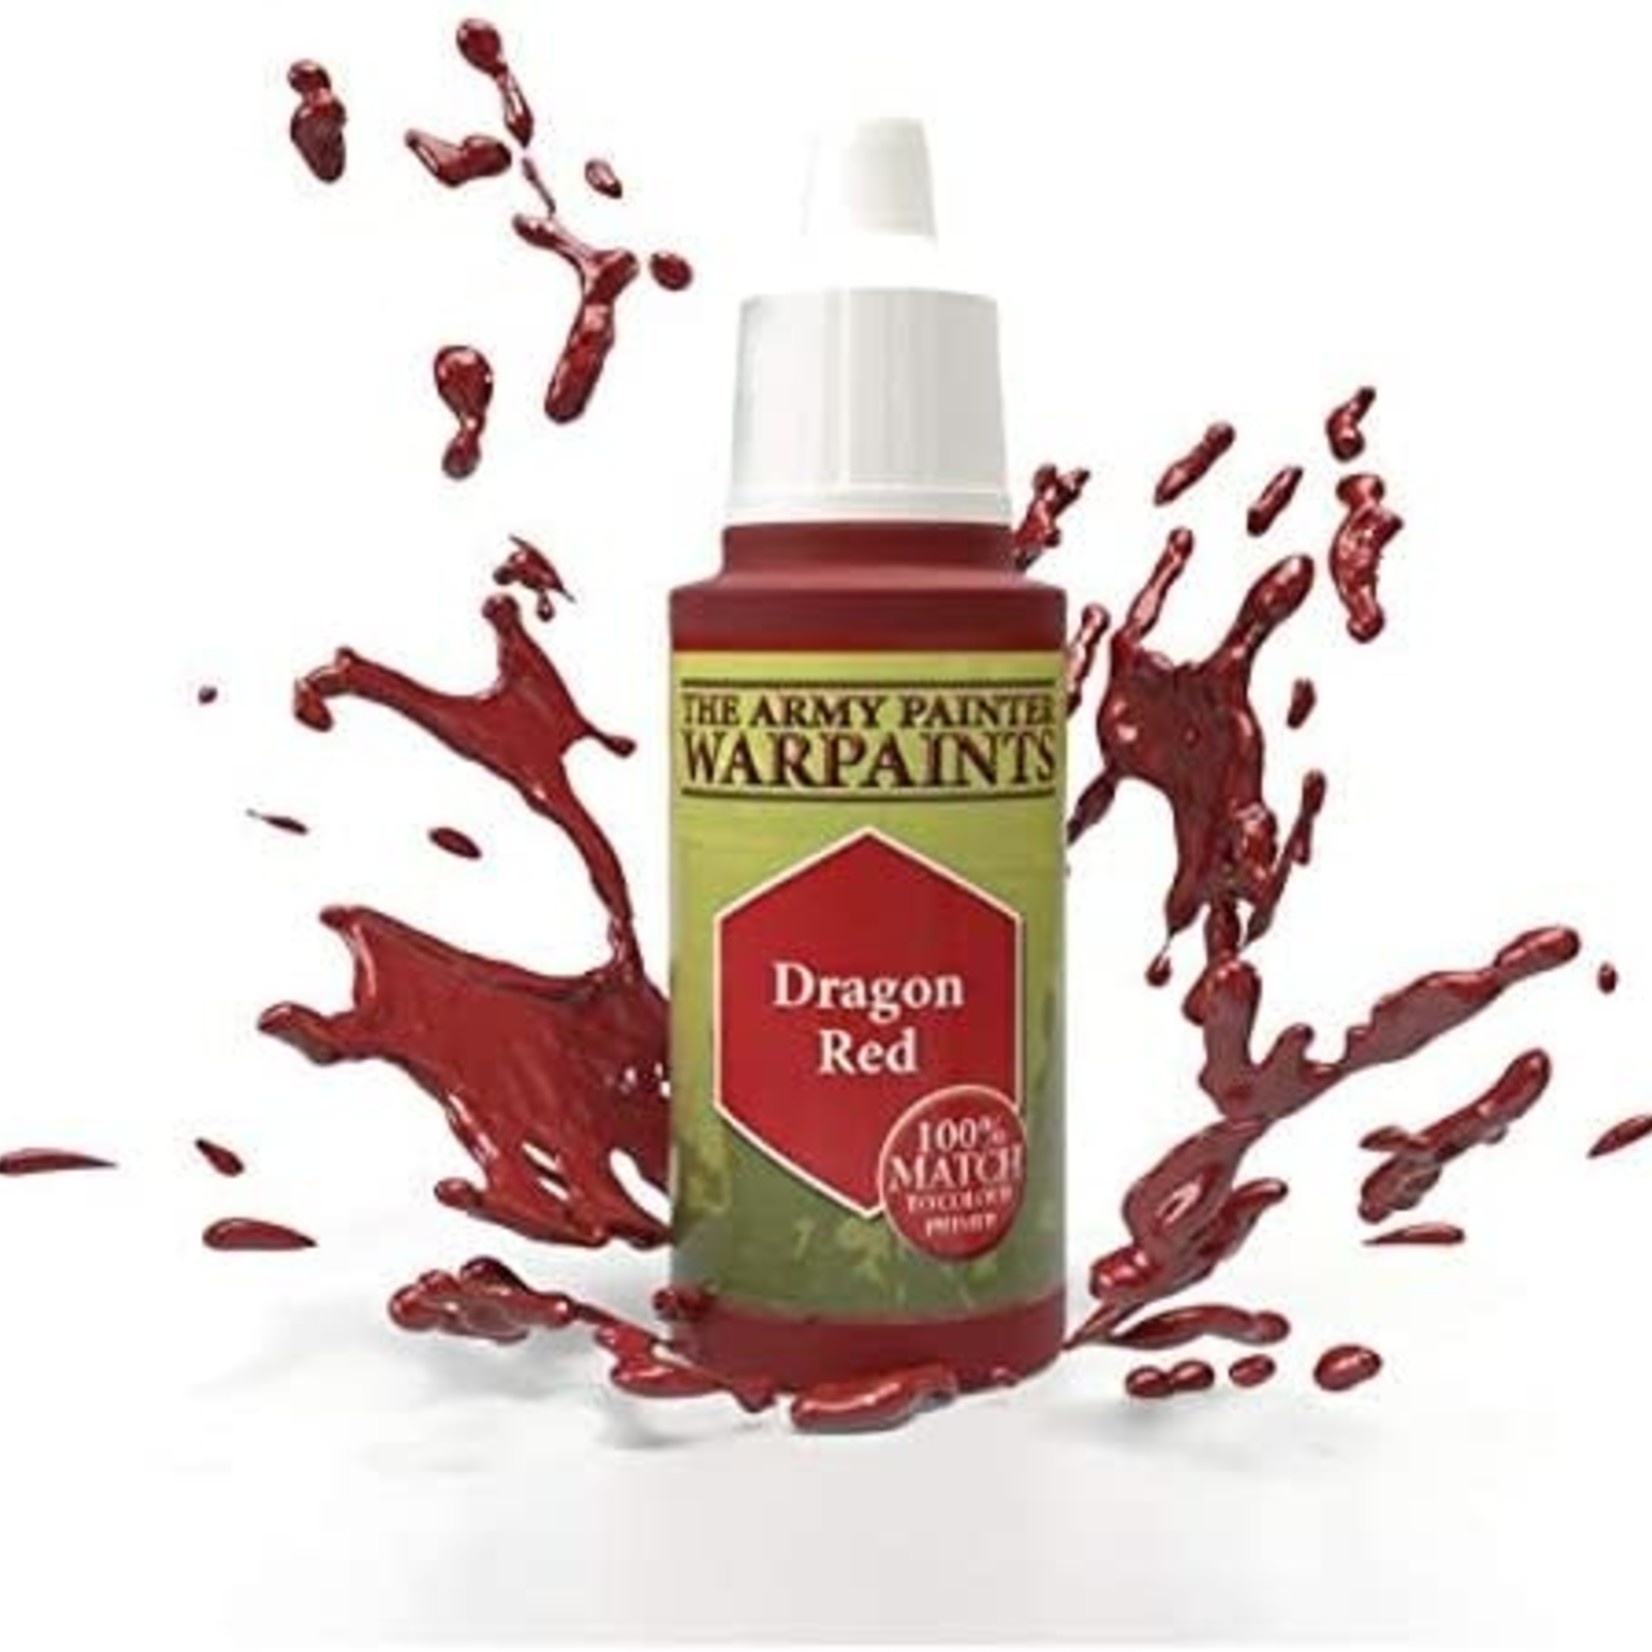 Army Painter Army Painter Warpaints Dragon Red